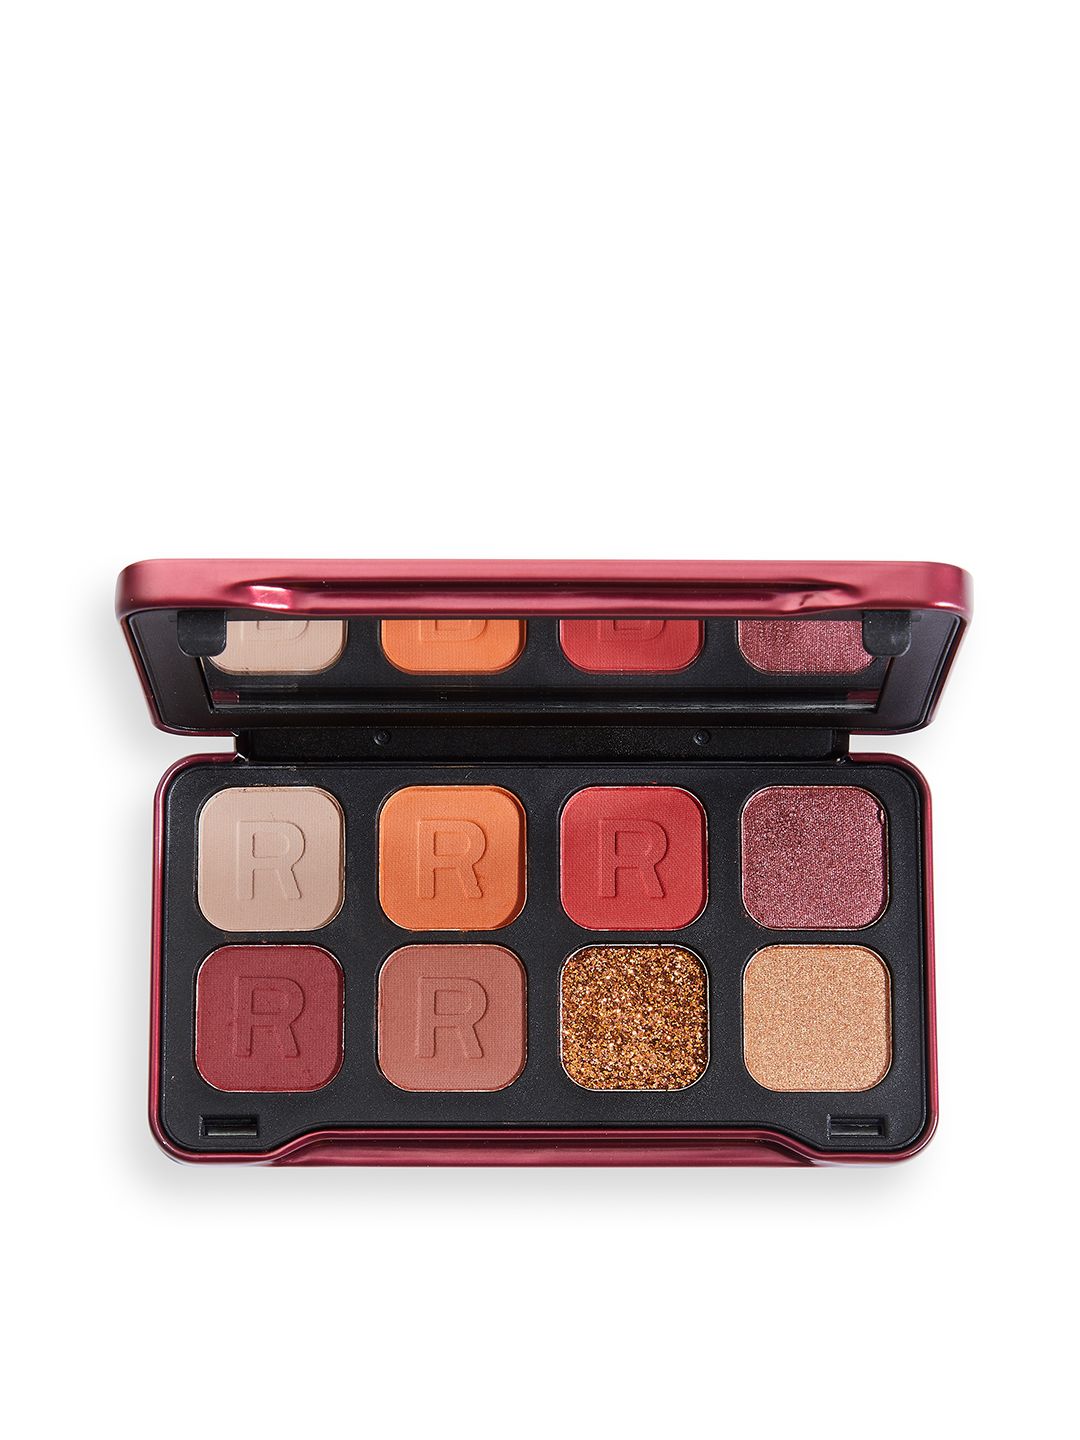 Makeup Revolution London Forever Flawless Dynamic Eyeshadow Palette - Dynasty 8 g Price in India